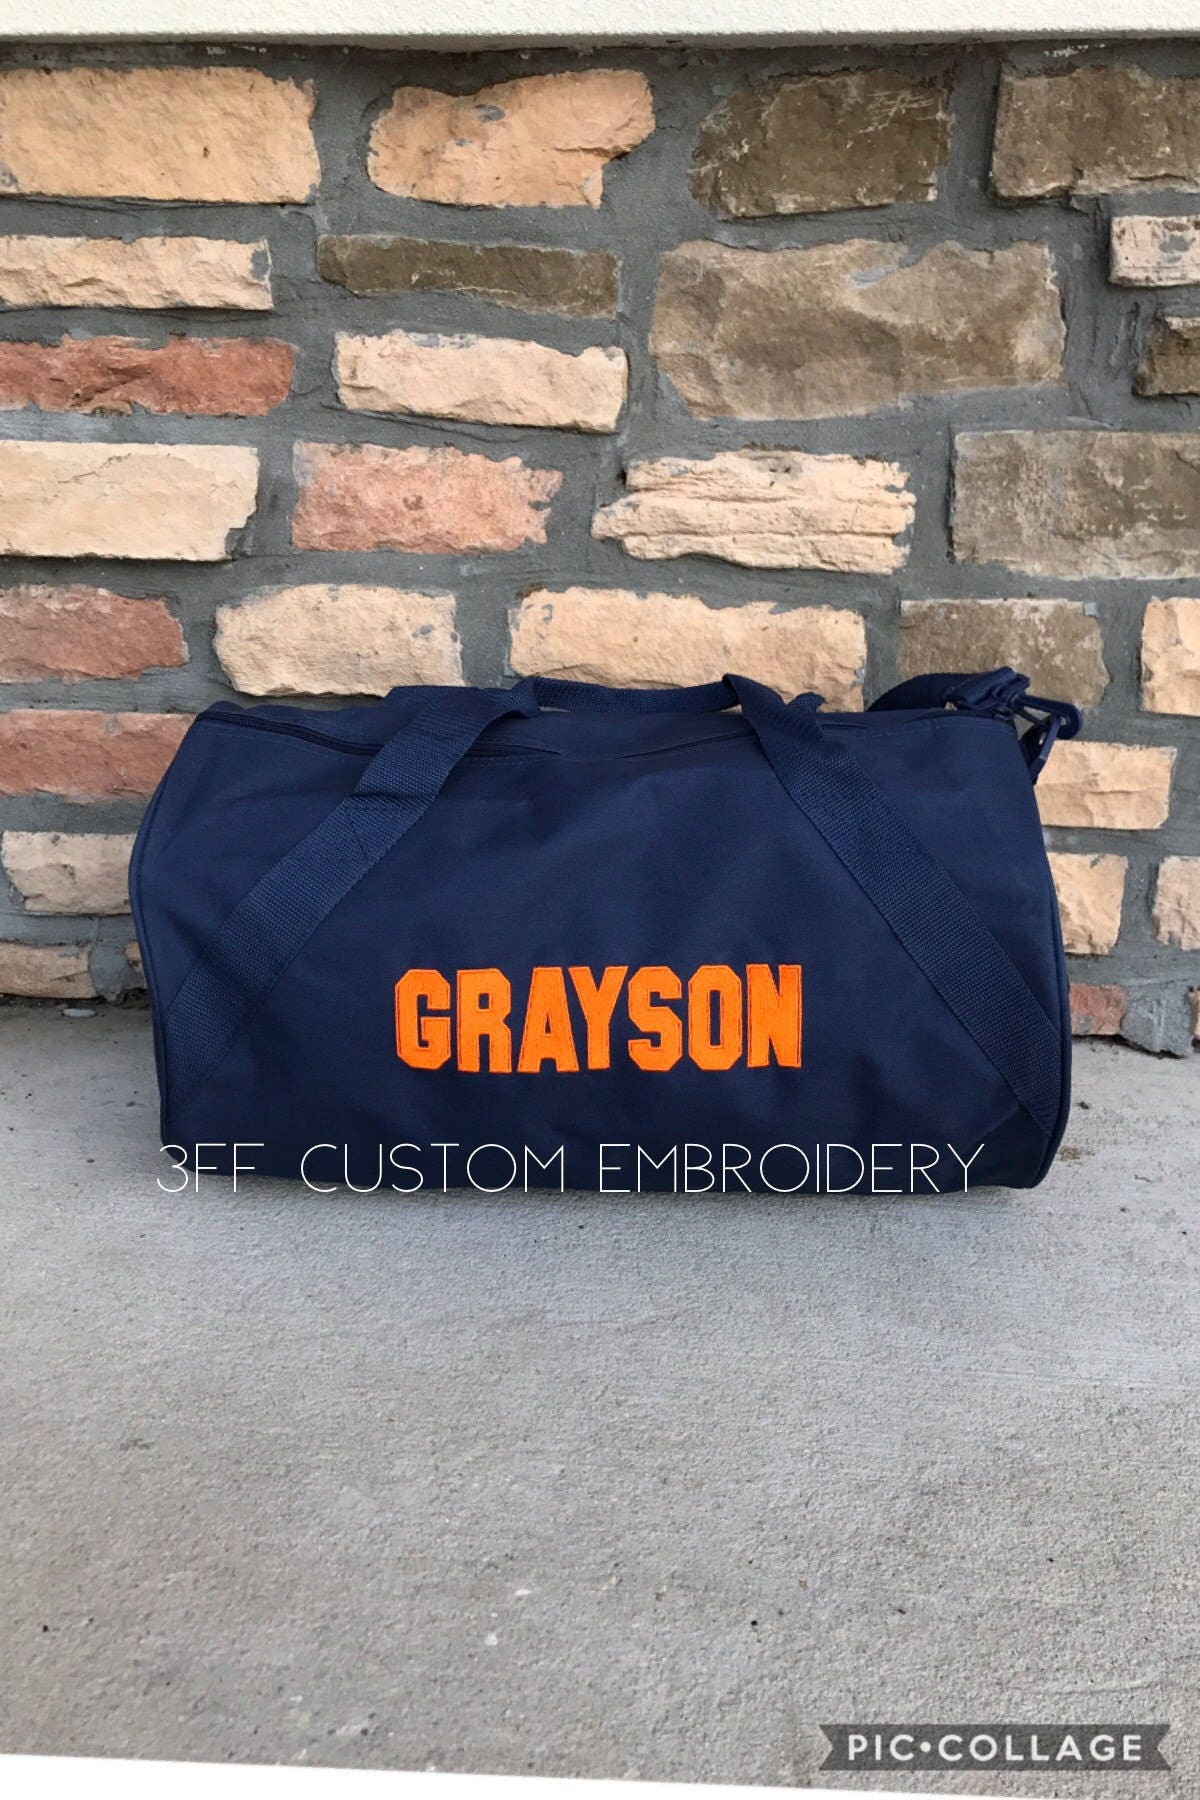 Blue Canvas Duffle Bag, Embroidered Duffle, Personalized Duffel.  Monogrammed, Custom Embroidery, Cotton Washable Bag, Crossbody Duffel Bag